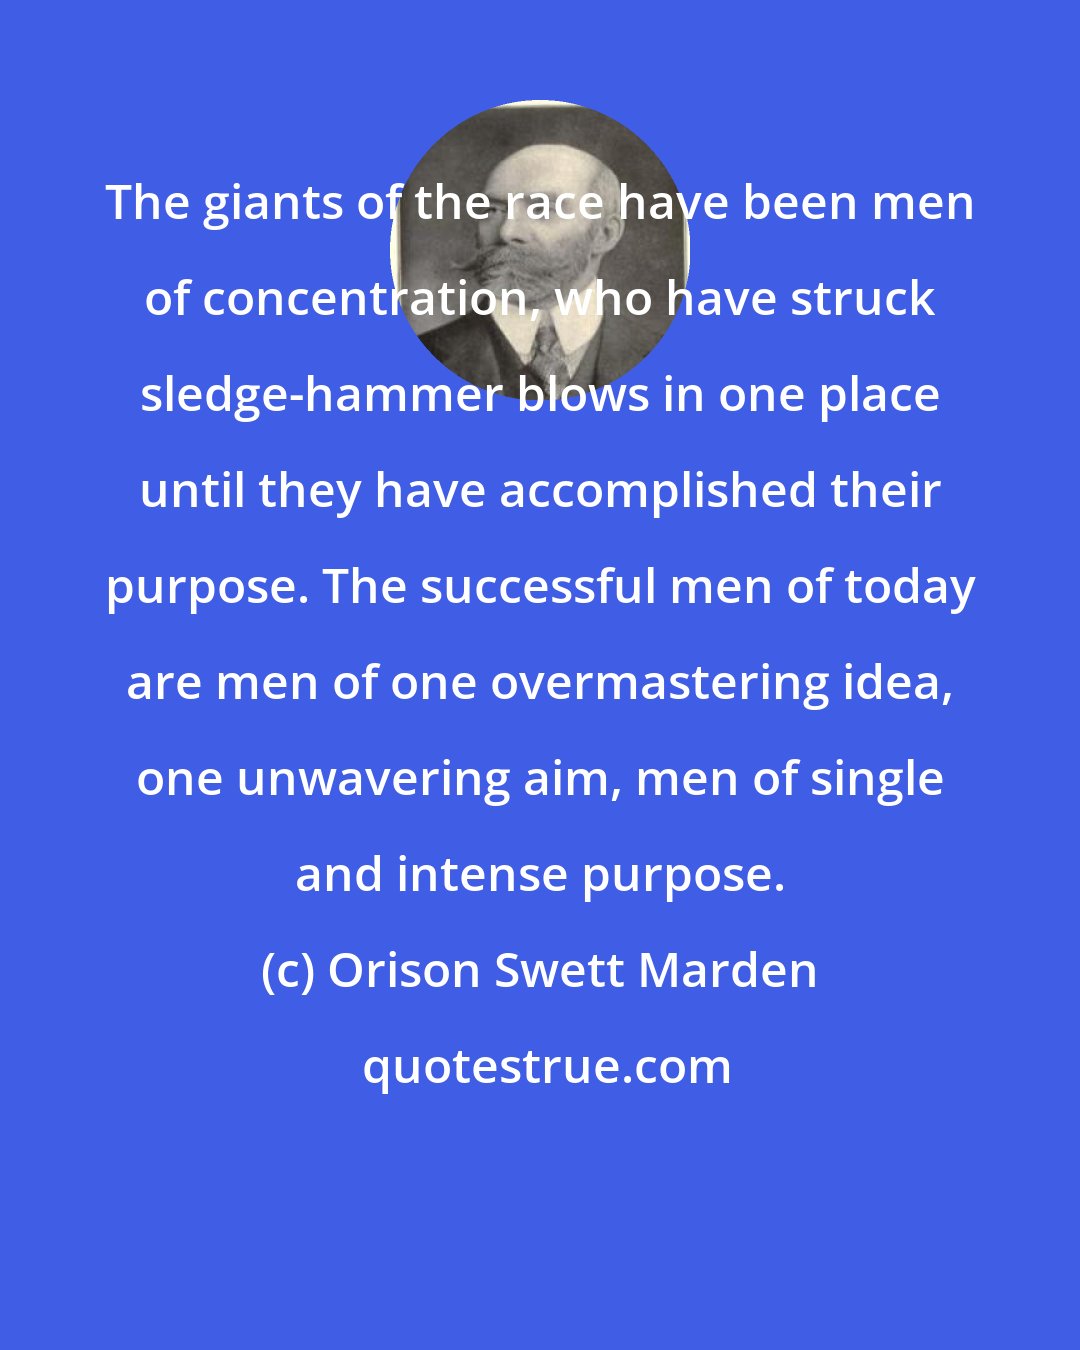 Orison Swett Marden: The giants of the race have been men of concentration, who have struck sledge-hammer blows in one place until they have accomplished their purpose. The successful men of today are men of one overmastering idea, one unwavering aim, men of single and intense purpose.